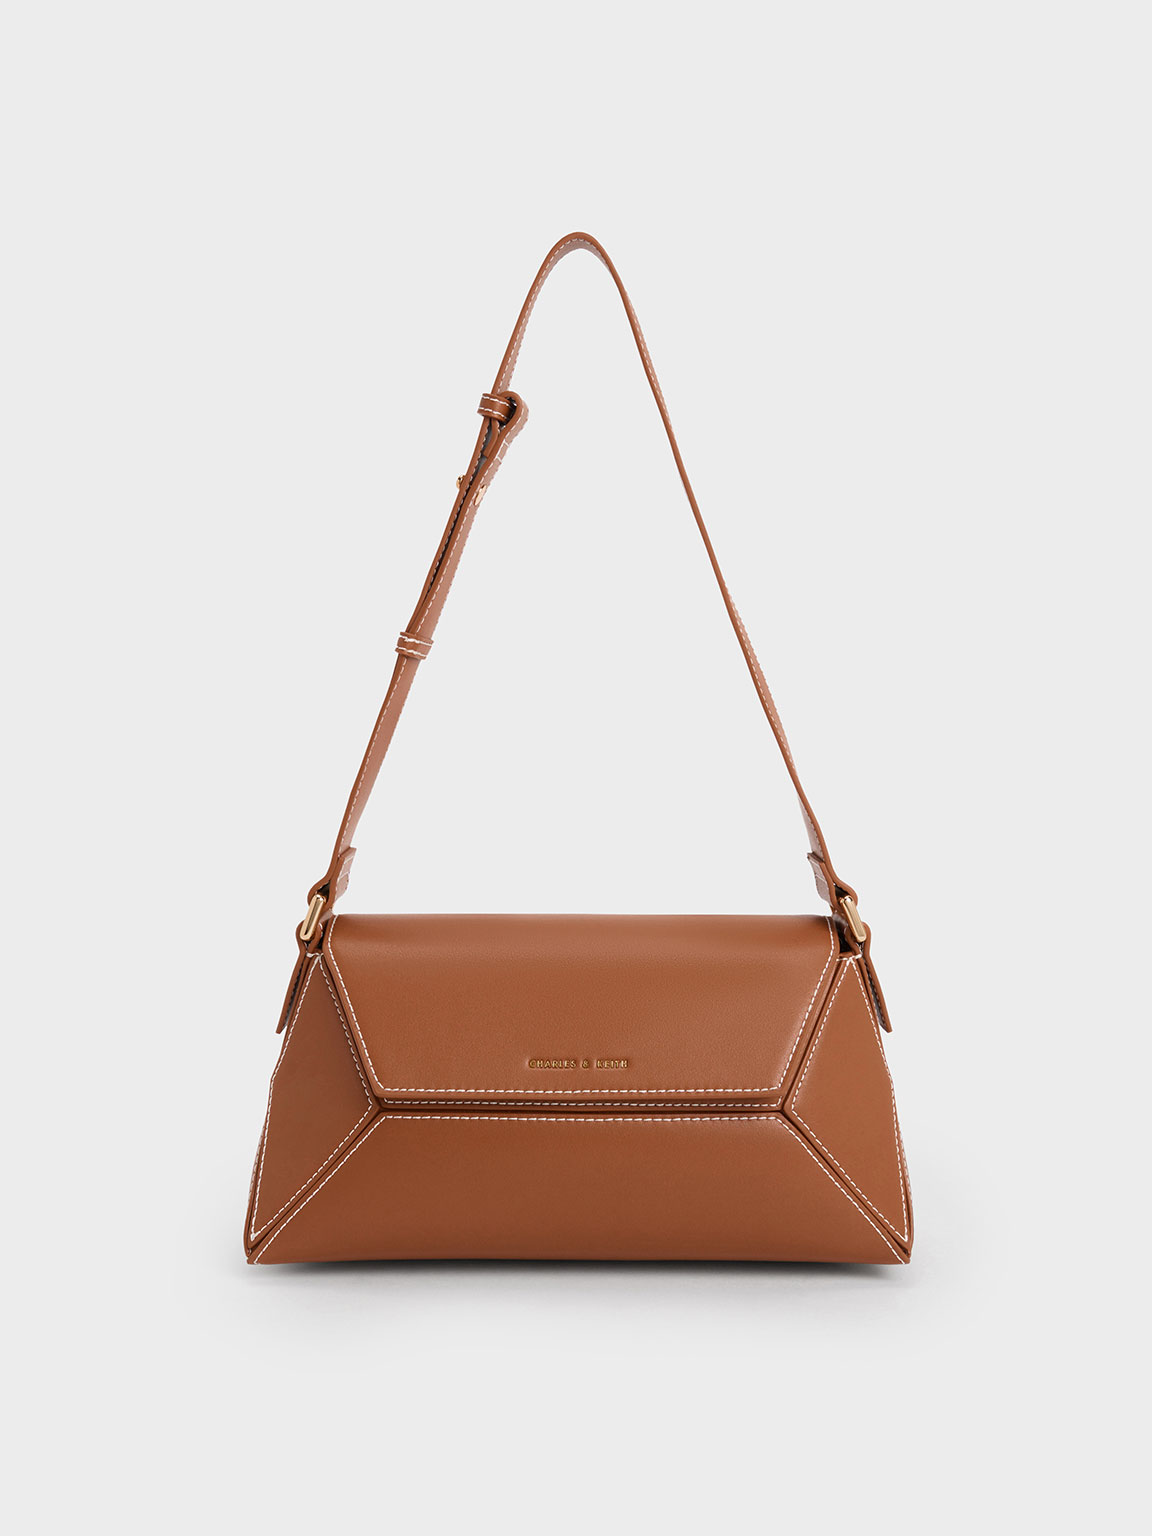 Chocolate Quilted Two-Way Zip Mini Bag - CHARLES & KEITH US